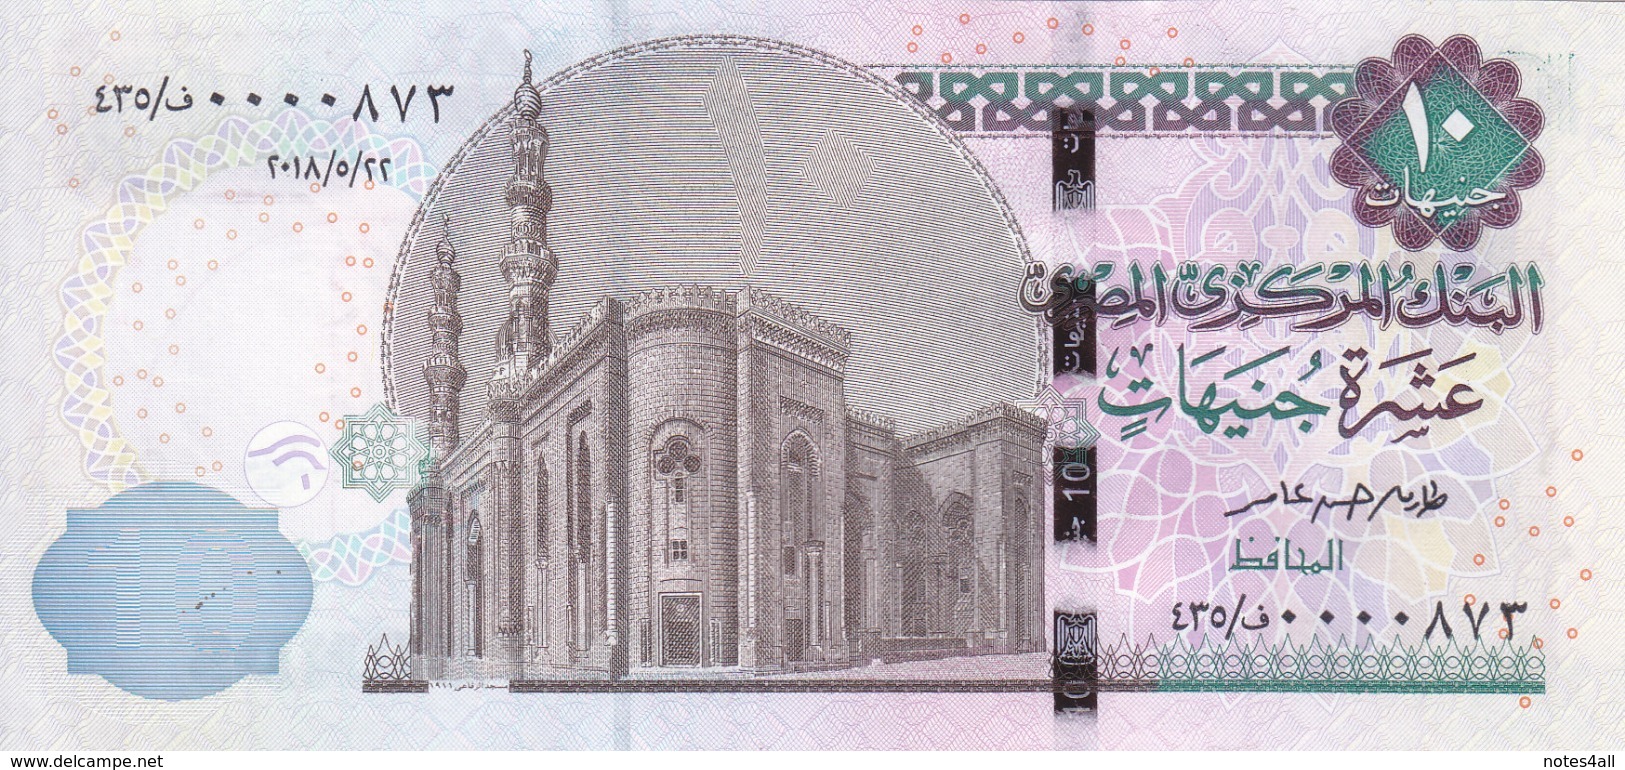 EGYPT 10 POUNDS EGP 2018 P-71b SIG/ T.AMER #24 LOW SERIAL #00008XX UNC */* - Aegypten